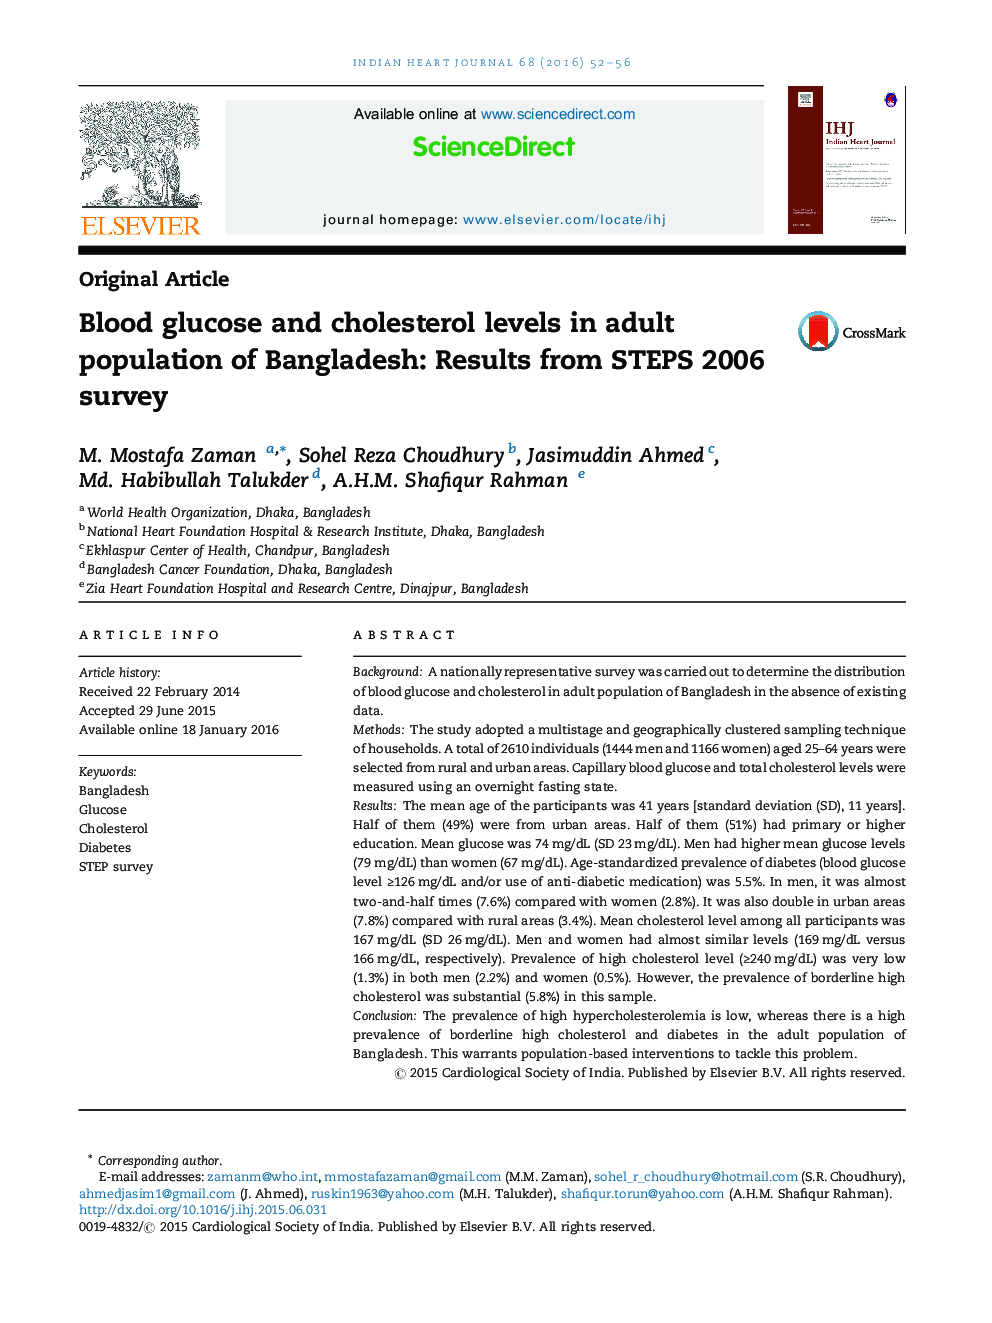 Blood glucose and cholesterol levels in adult population of Bangladesh: Results from STEPS 2006 survey